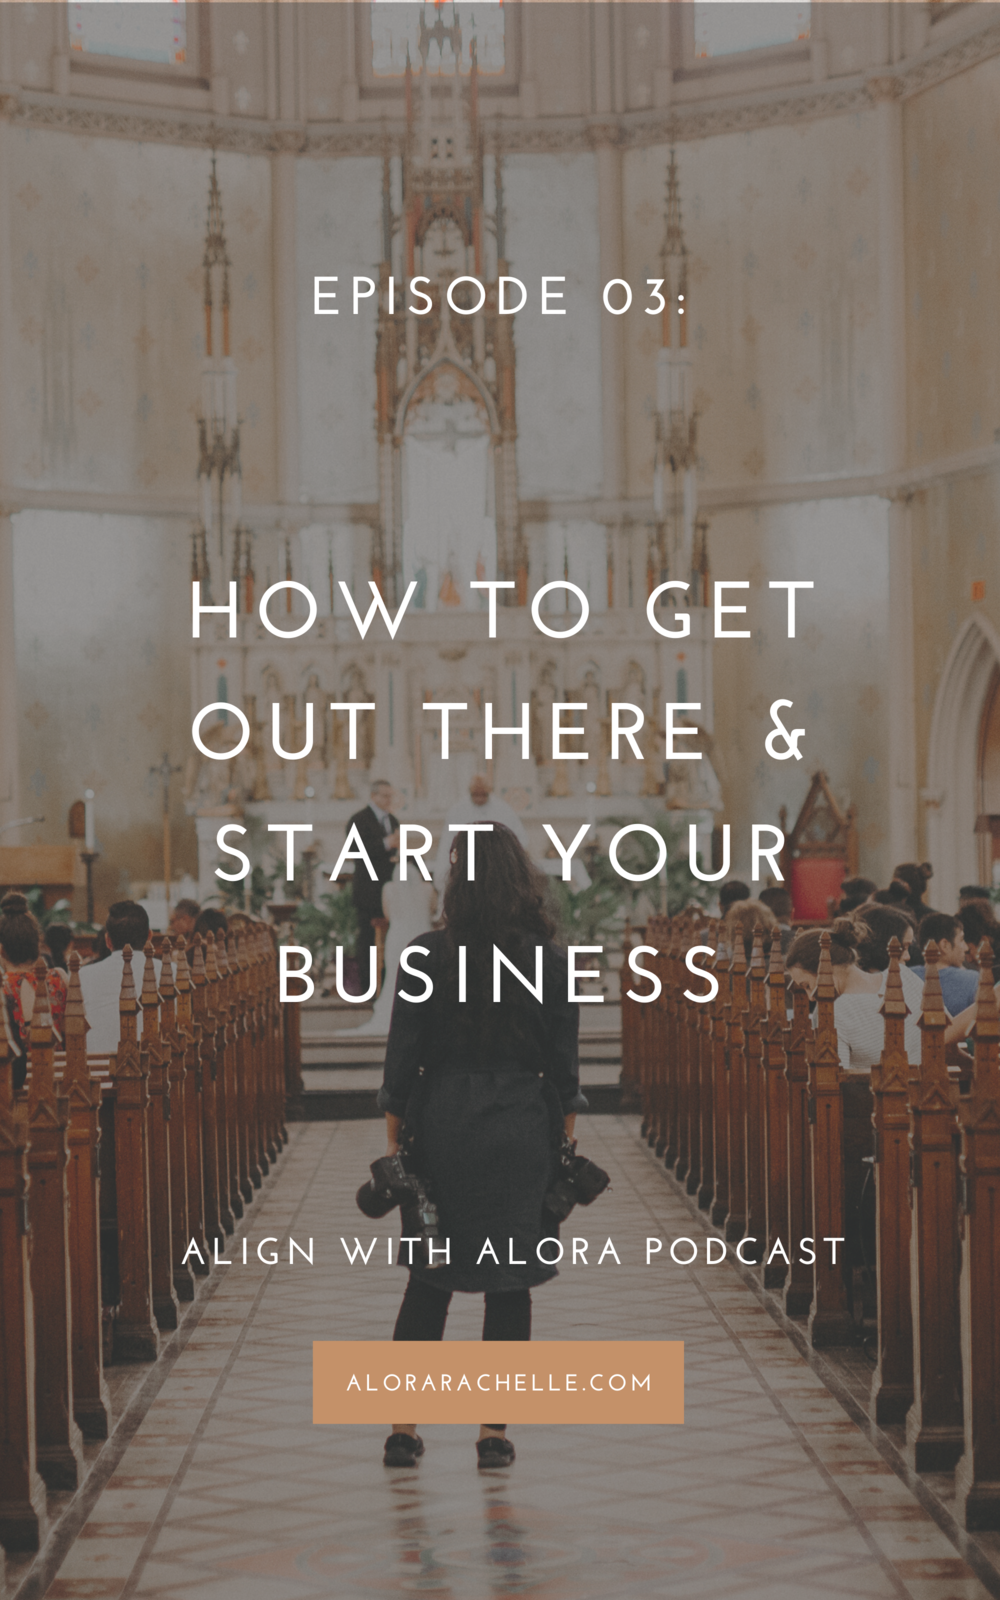 Copy of Align with Alora Podcast Blog (6).png